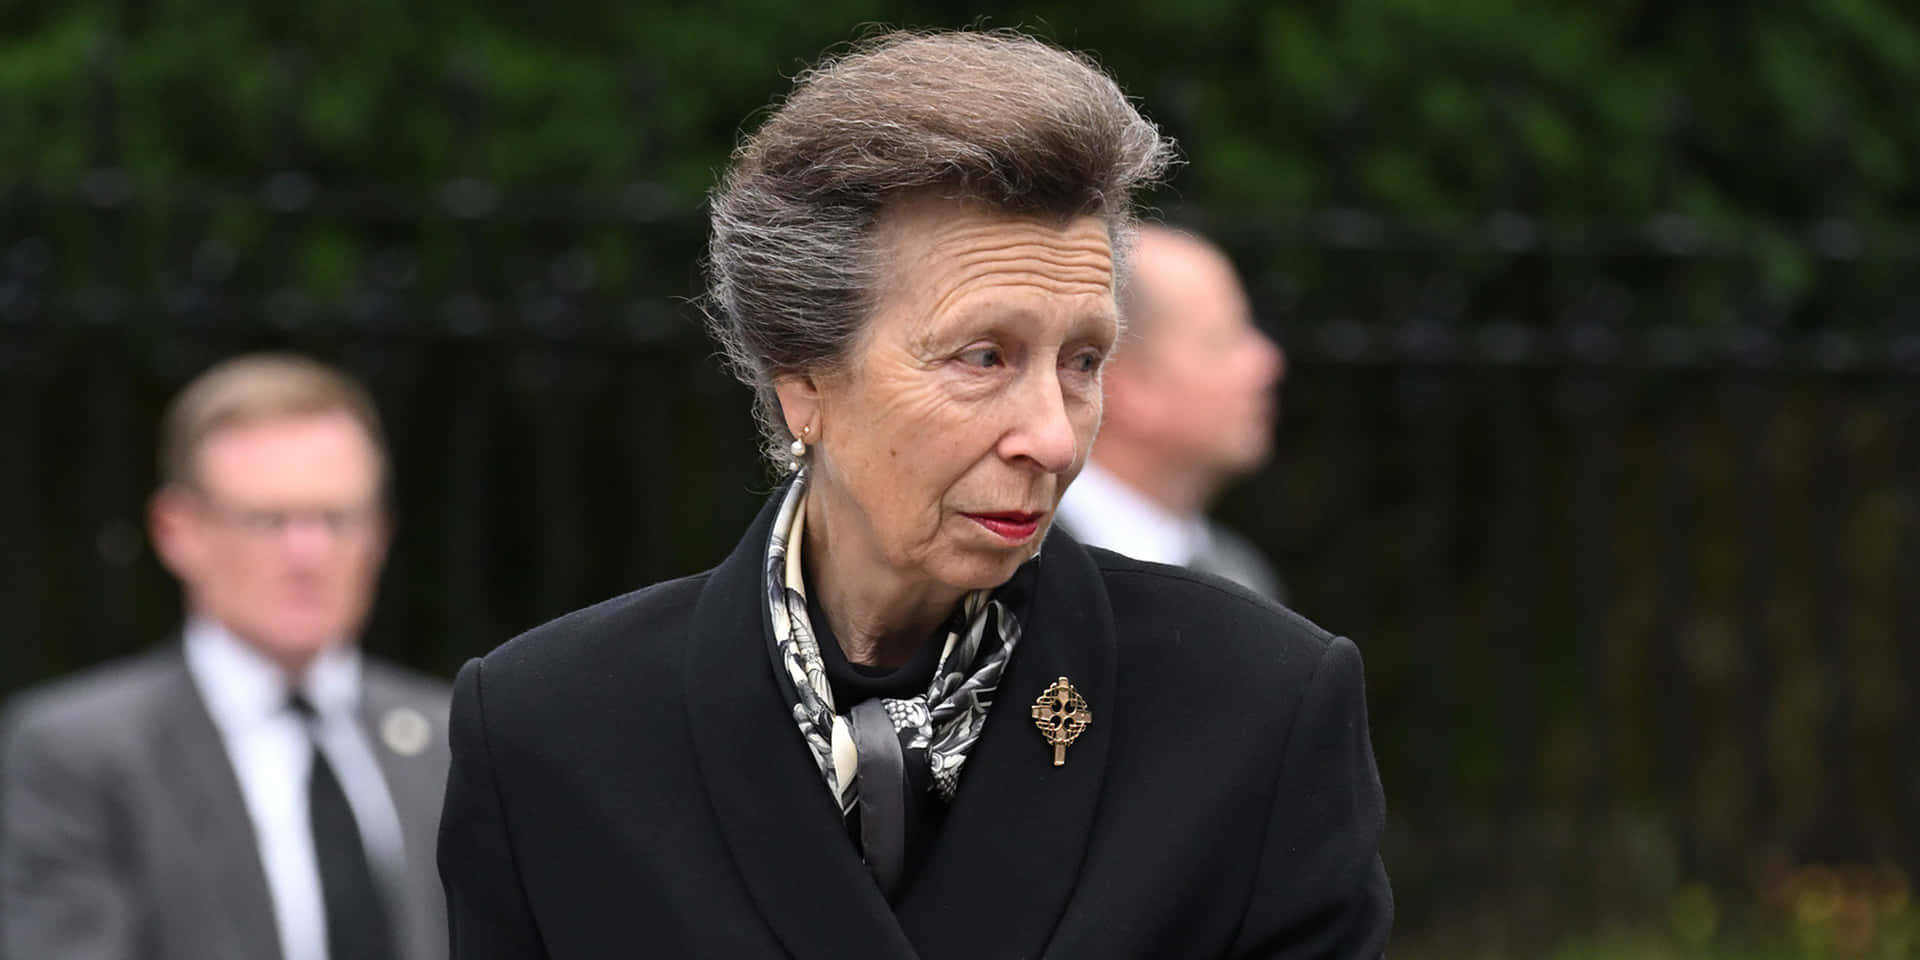 Princess Anne Looking Somber in Mourning Wallpaper